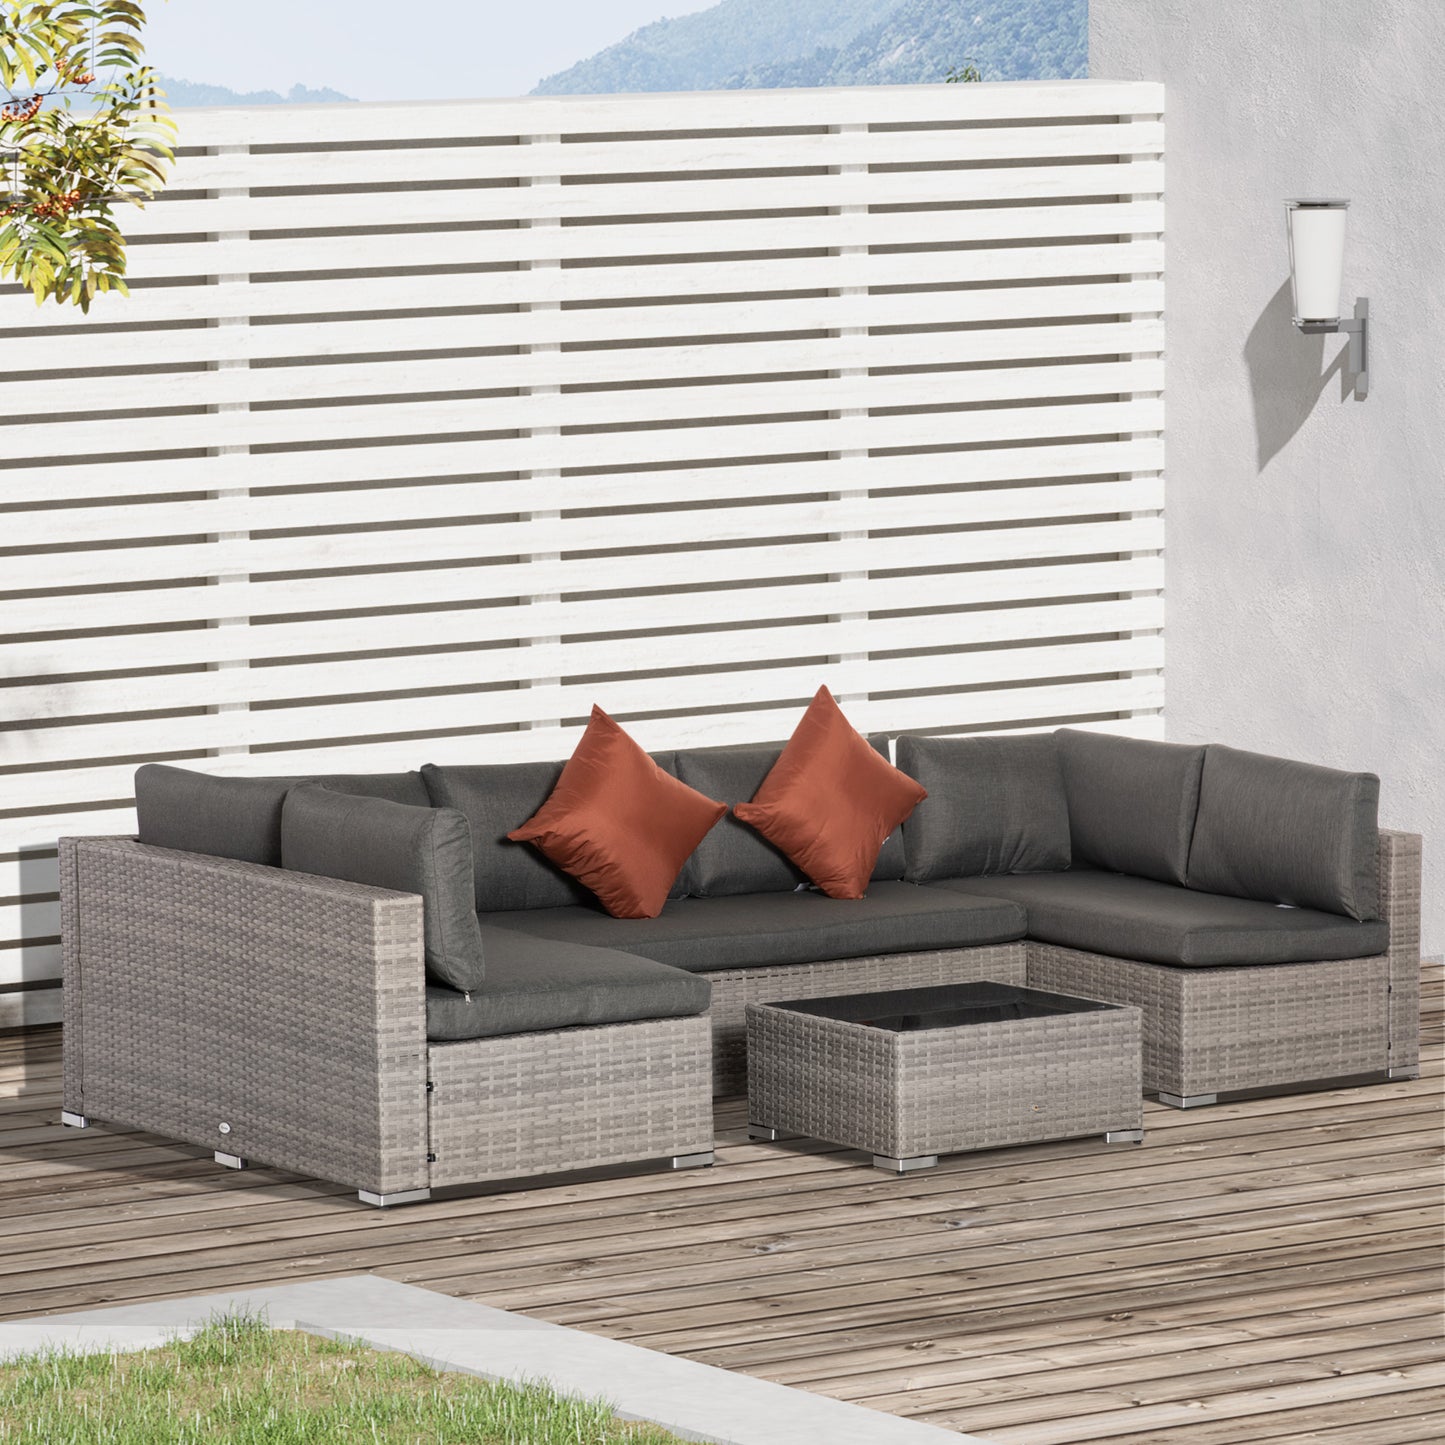 Outsunny 6-Seater Garden Rattan Furniture PE Rattan Sofa Set, Outdoor All Weather Conservatory Furniture, w/ Tempered Glass Coffee Table, Deep Grey